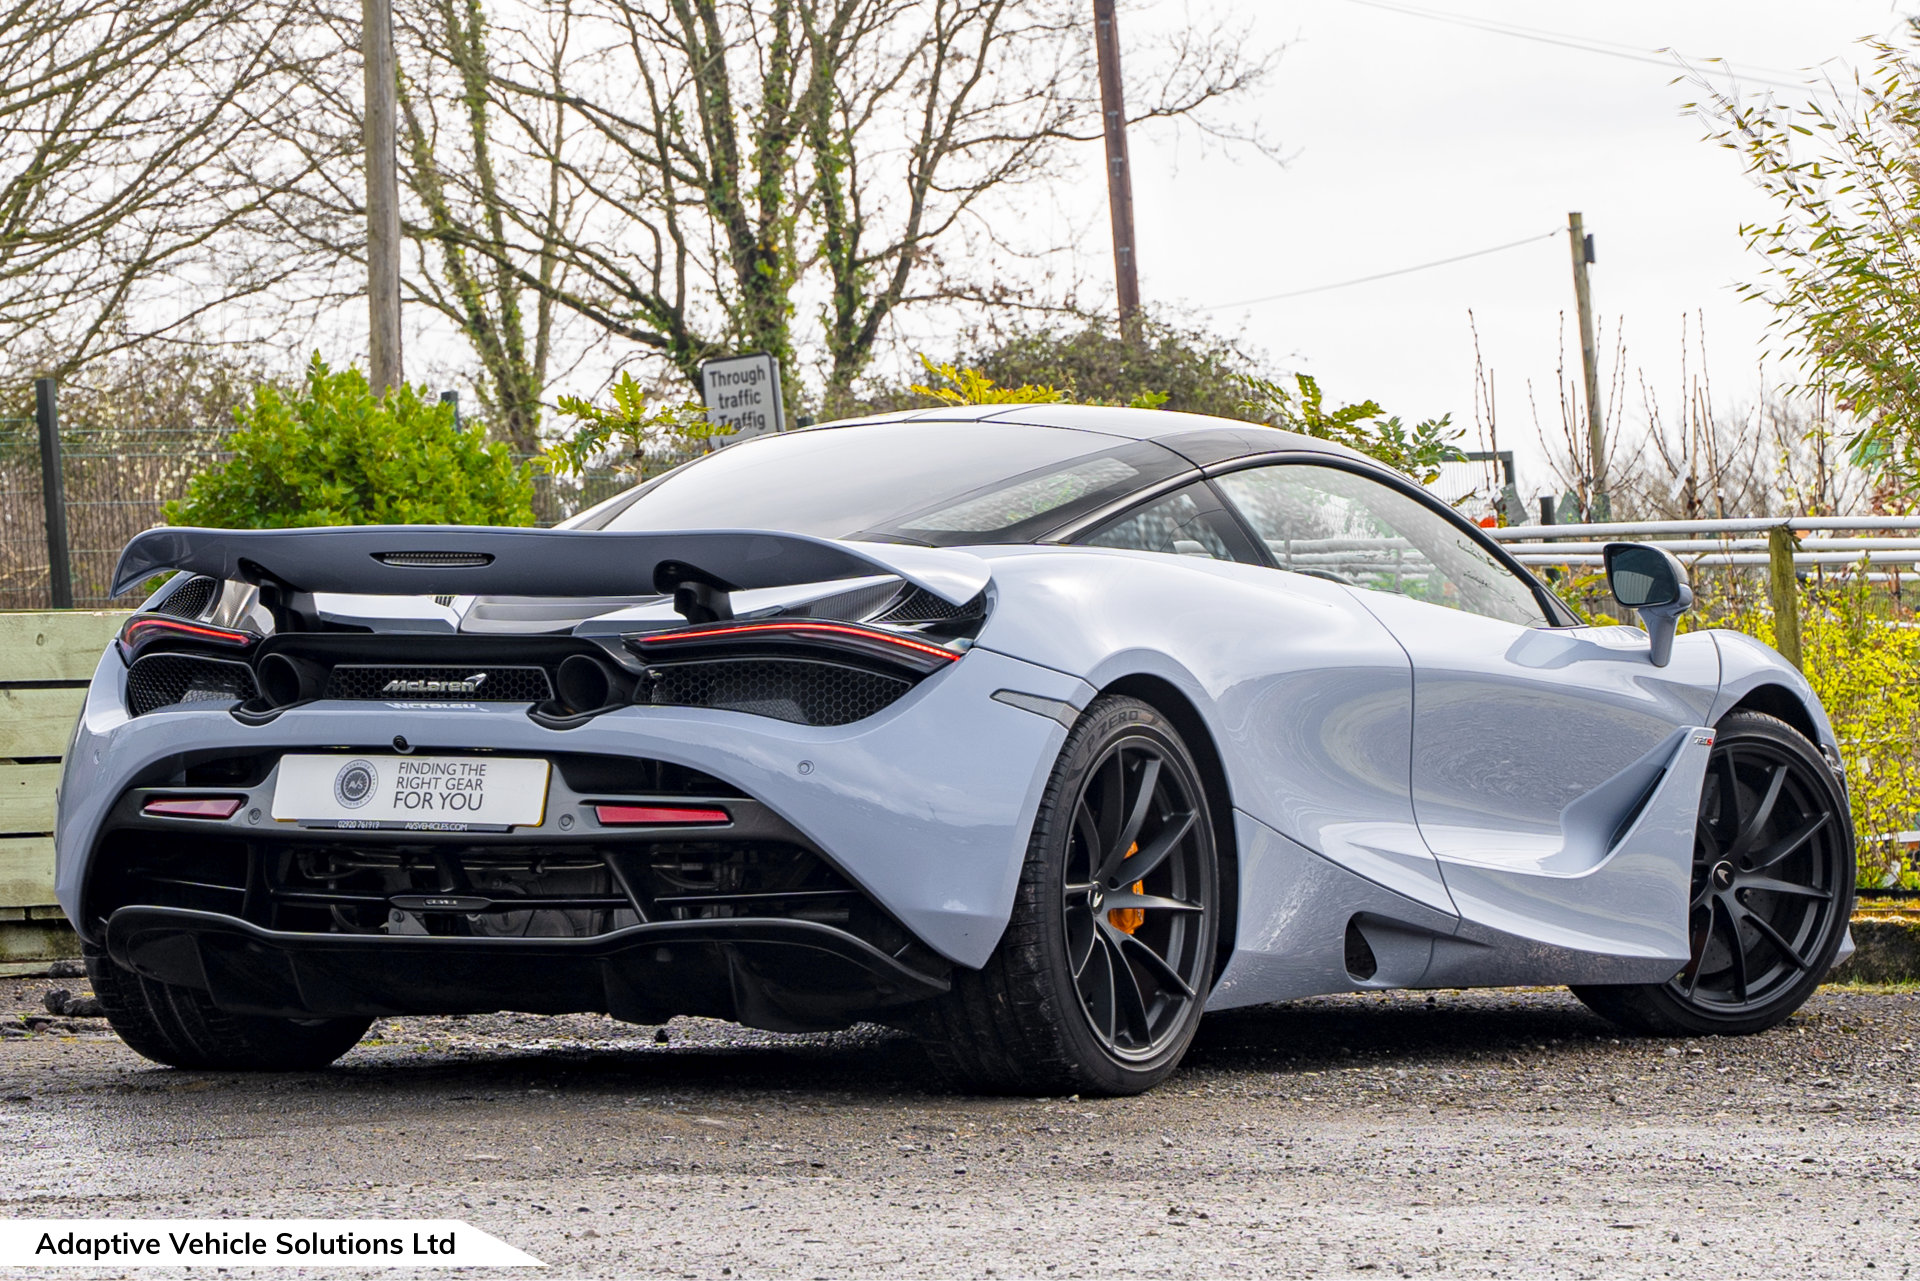 2021 McLaren 720s Performance Coupe off side rear wing up lower